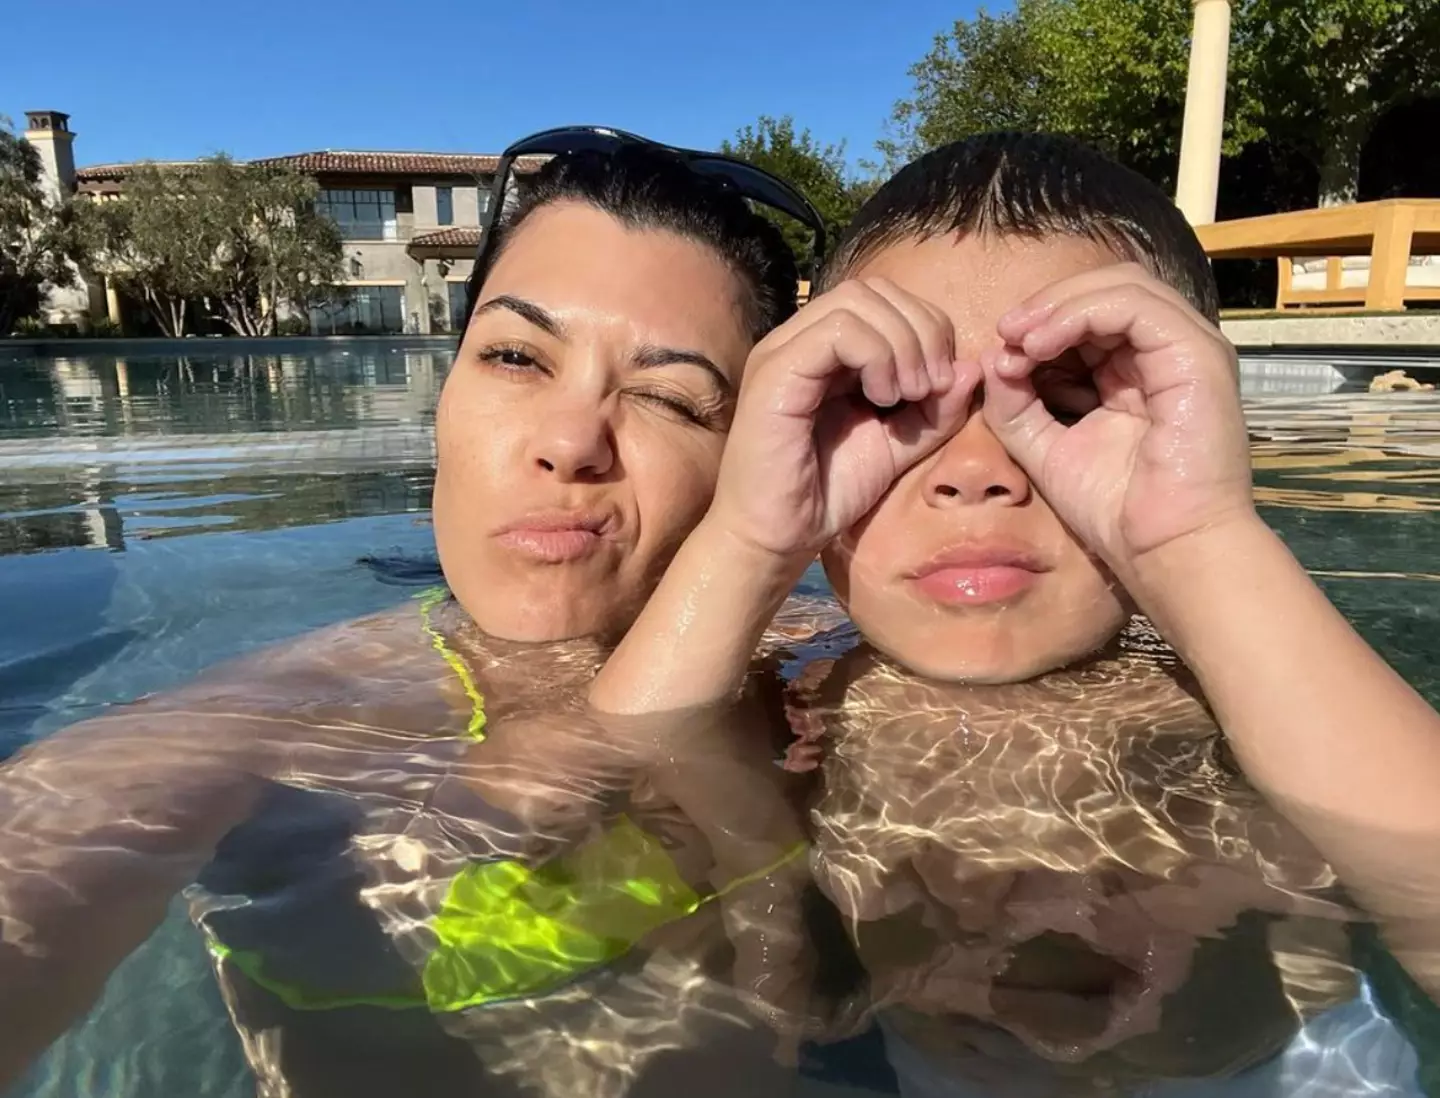 kourtney and her seven-year-old son Reign.